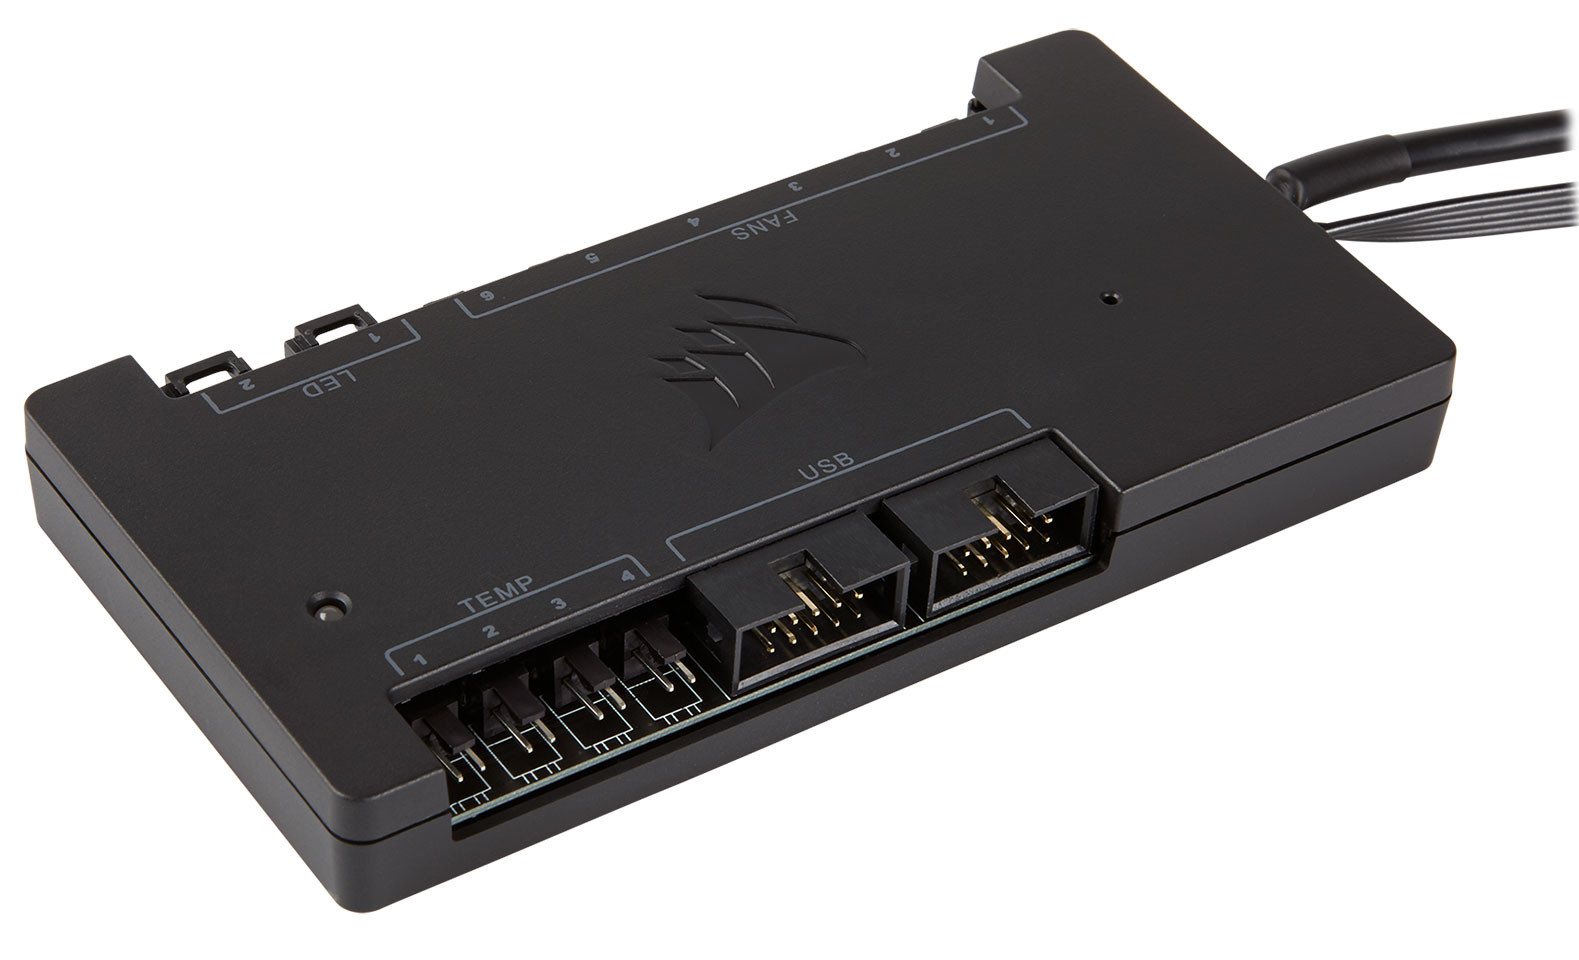 Corsair Announces New LINK Fan and Lighting Controllers